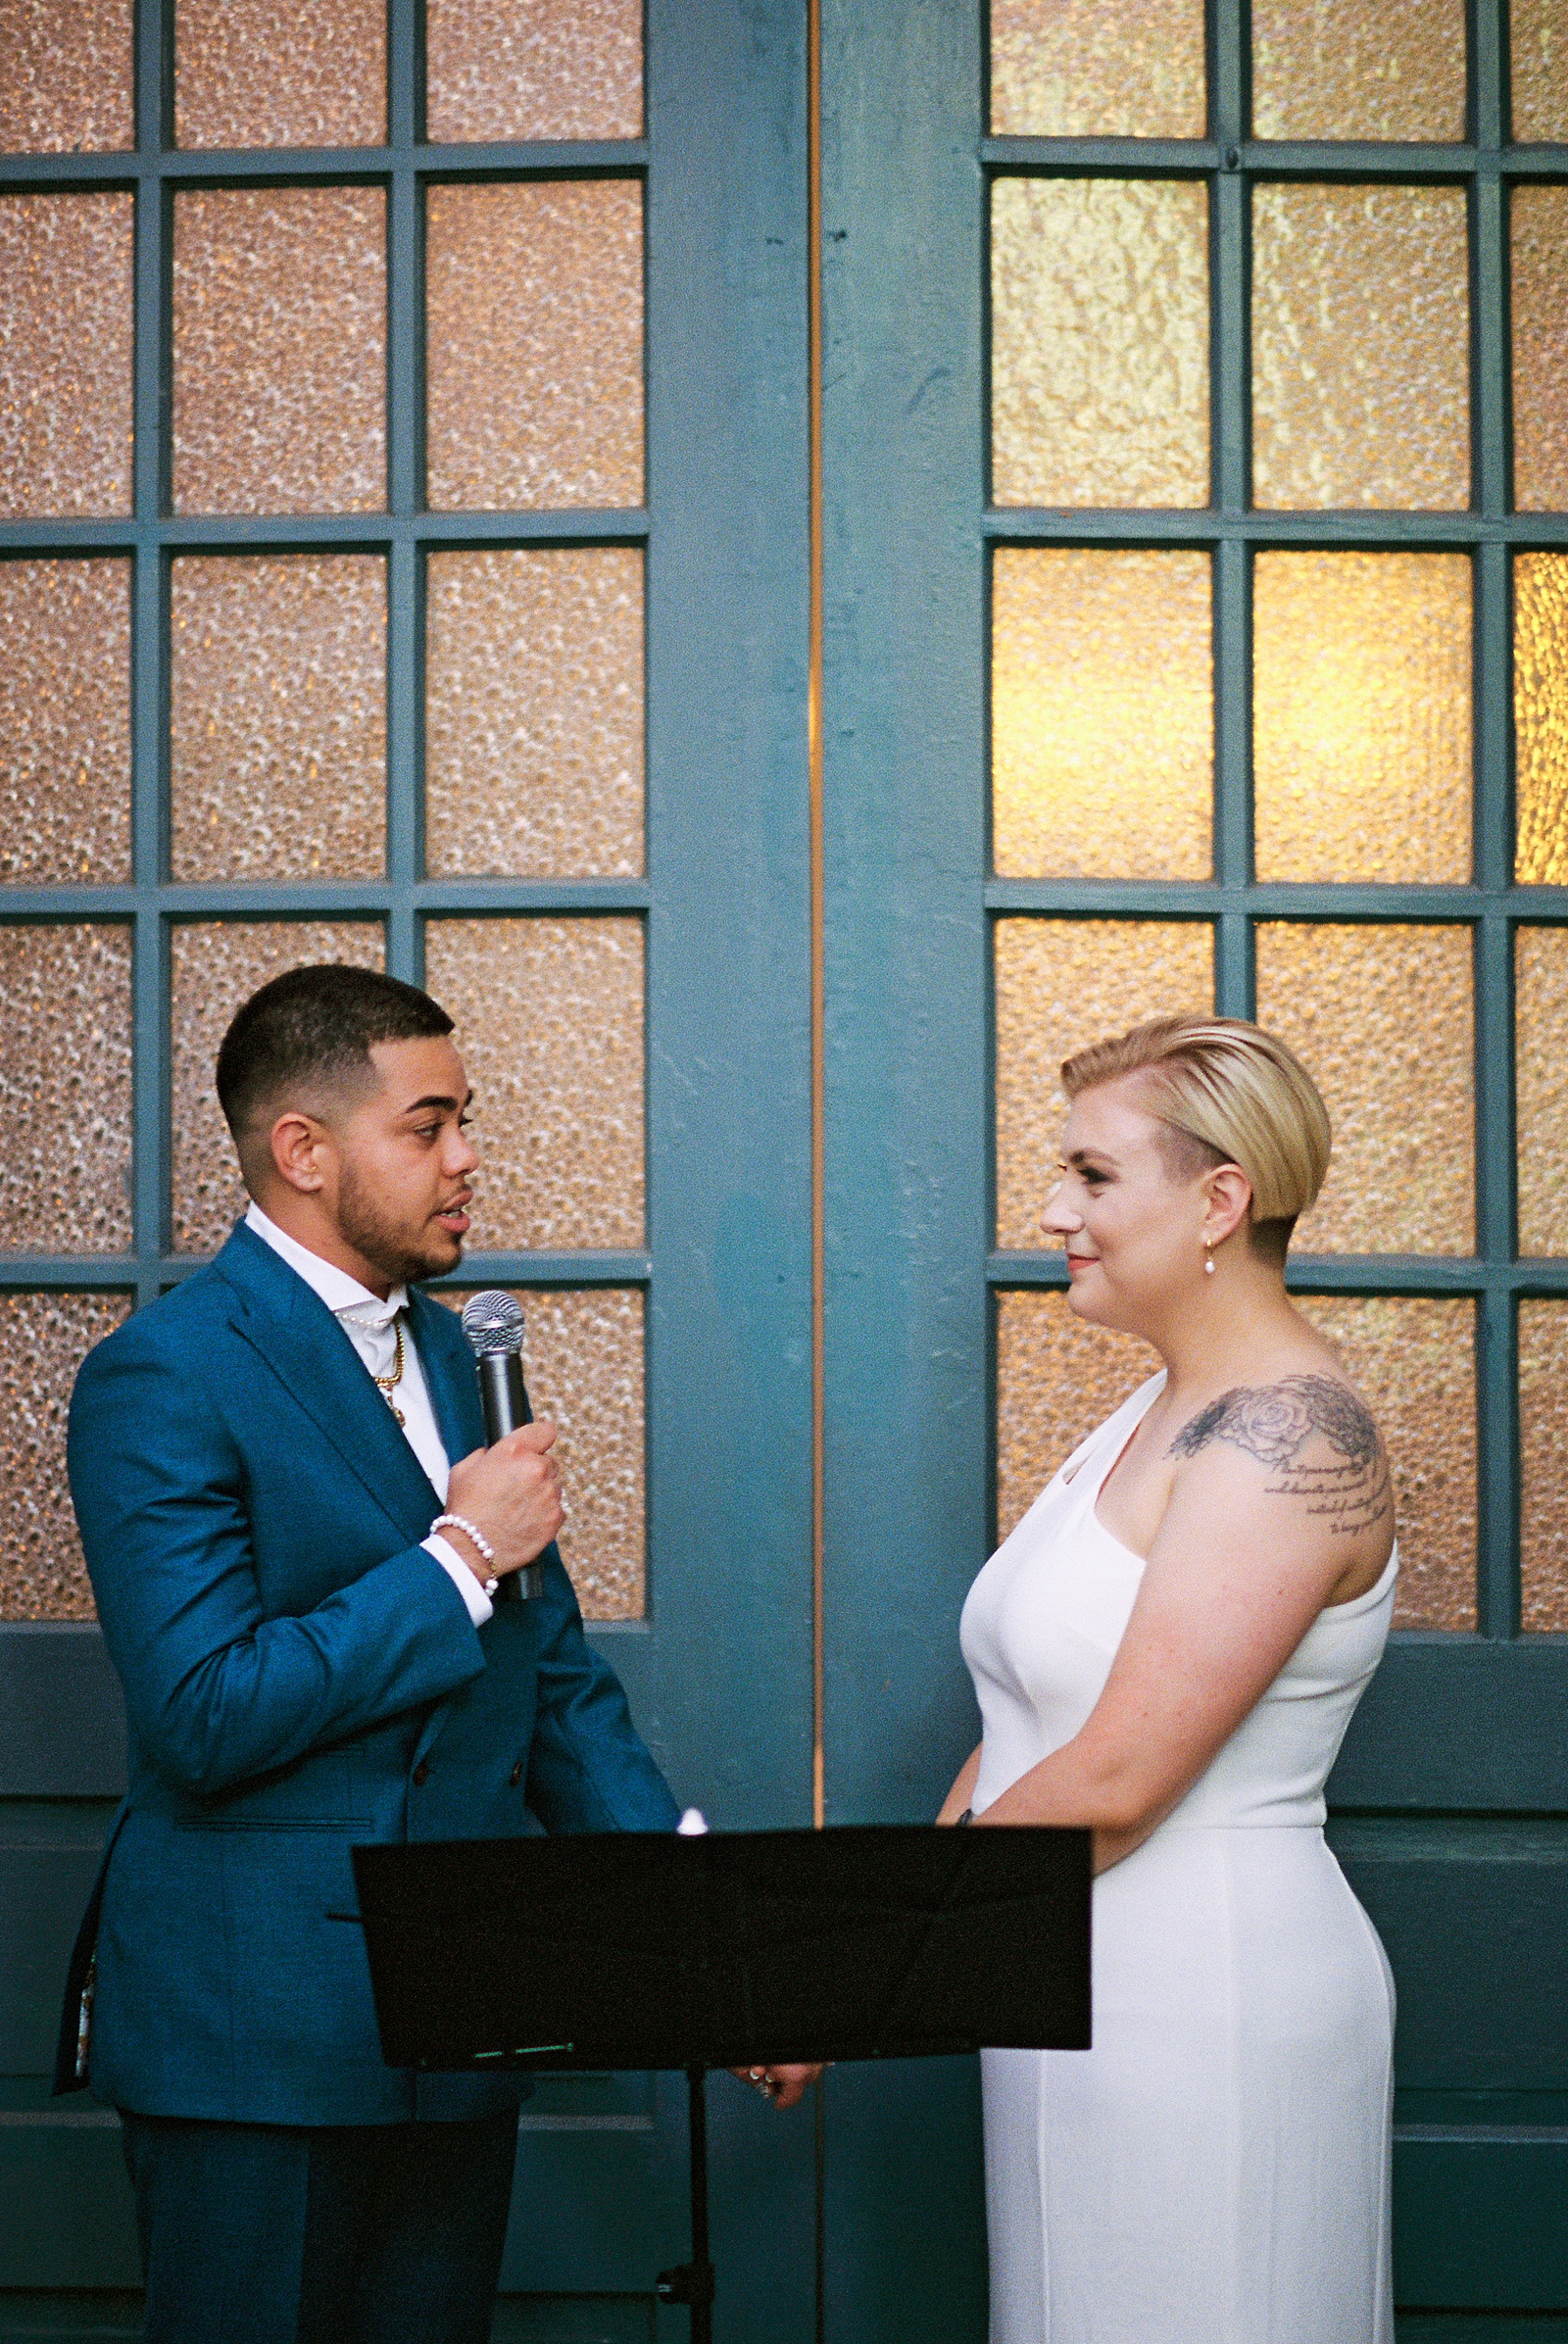 A marrier says their vows into a microphone while a bride listens.